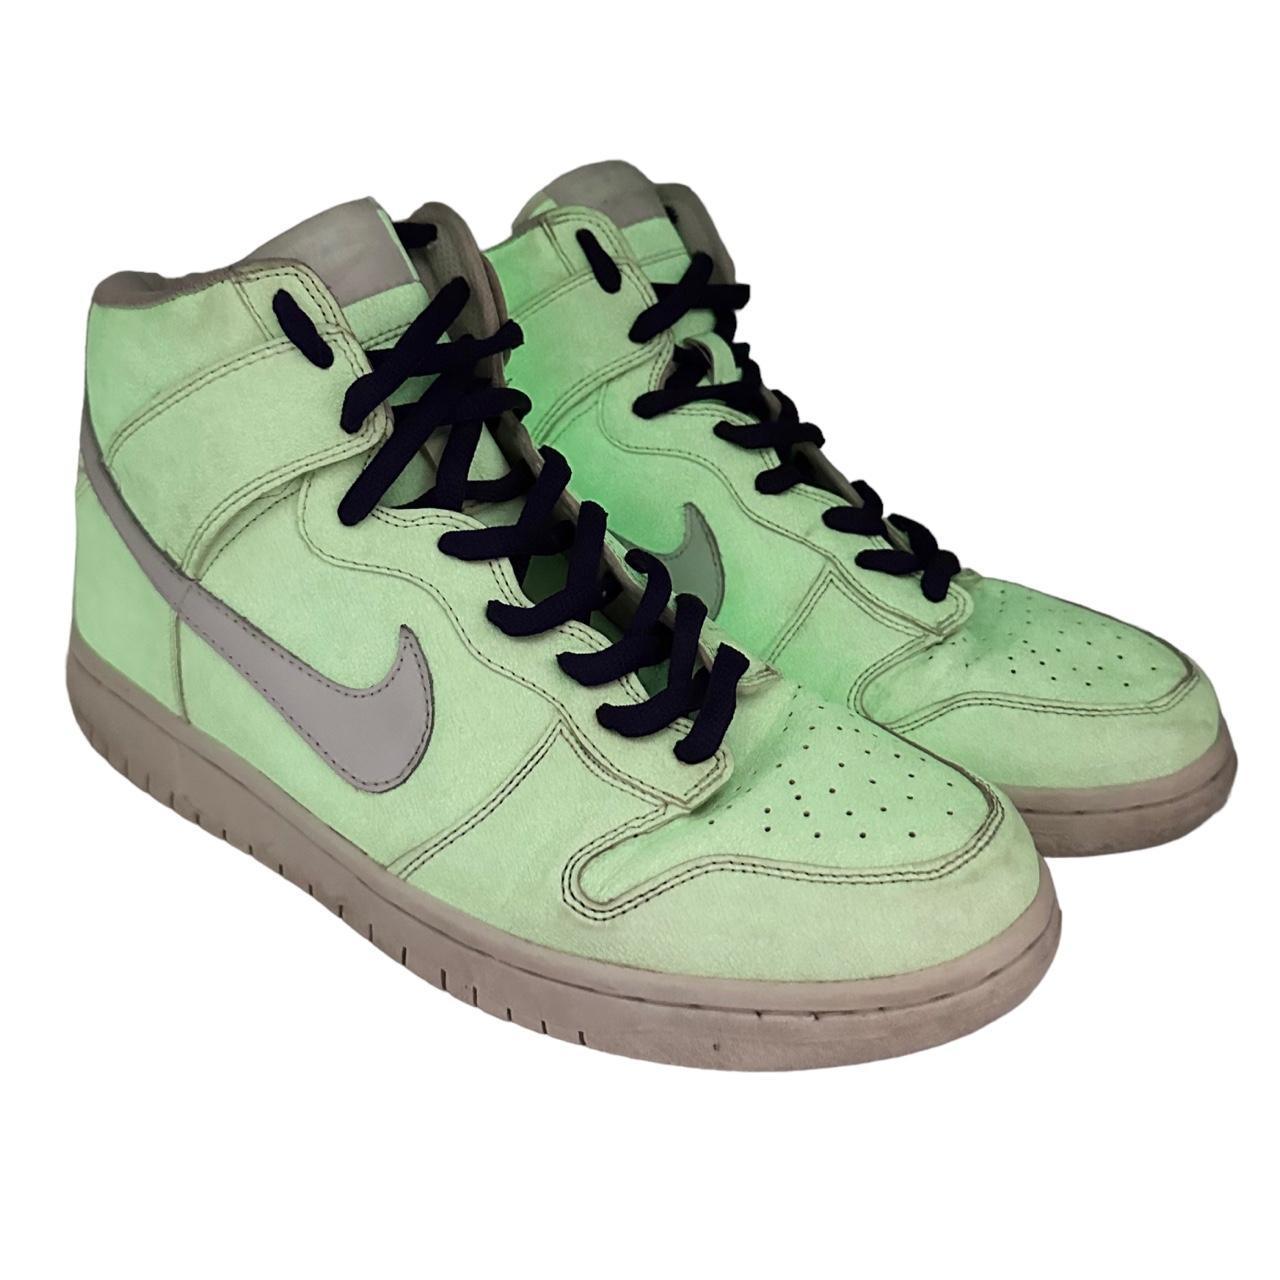 Vintage Nike Dunk High Glow In The Dark Size UK 10 - Known Source